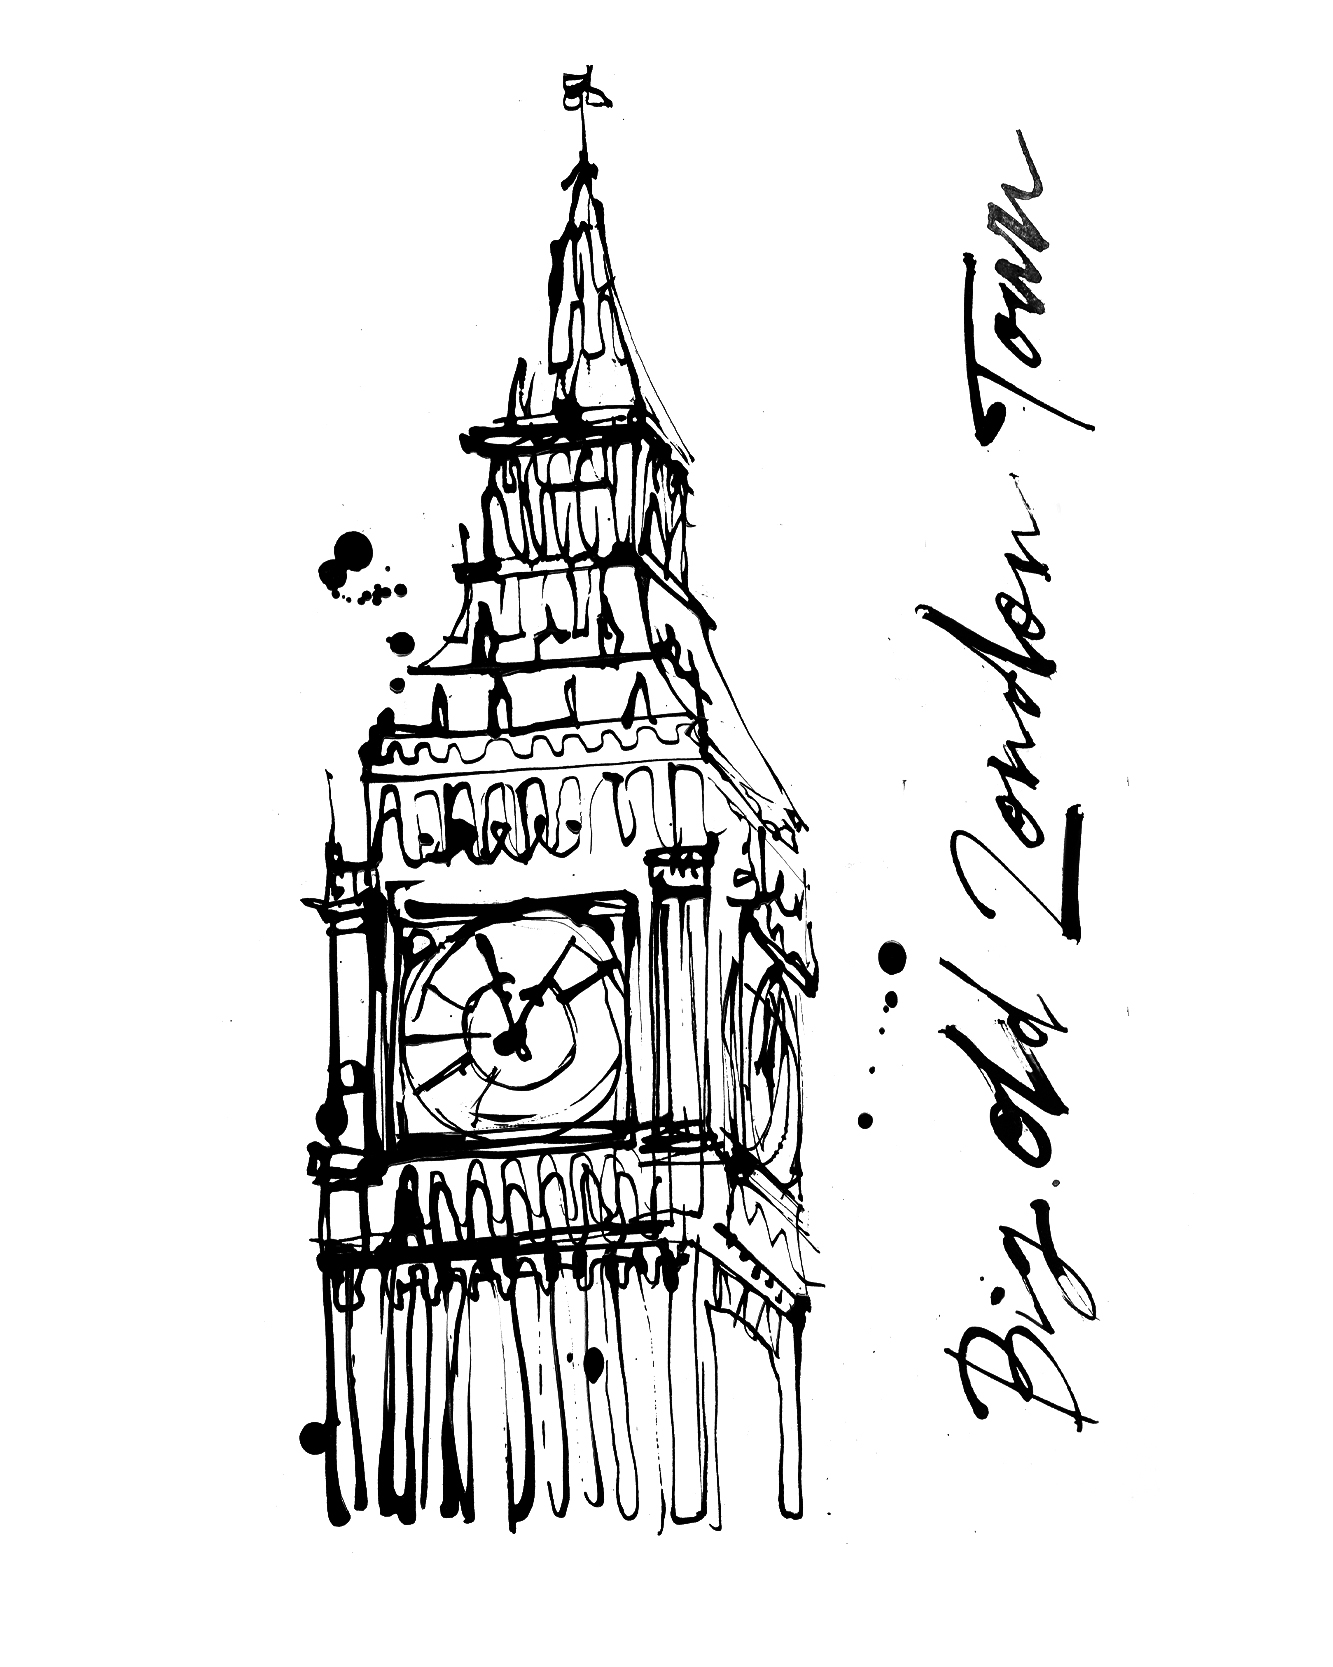 Sketchbook drawings of Big Ben London landmarks  in celebration of London Design Festival. Initial stage of the project capturing iconic London architecture and the energy of the city. Black ink drawing and  hand drawn lettering